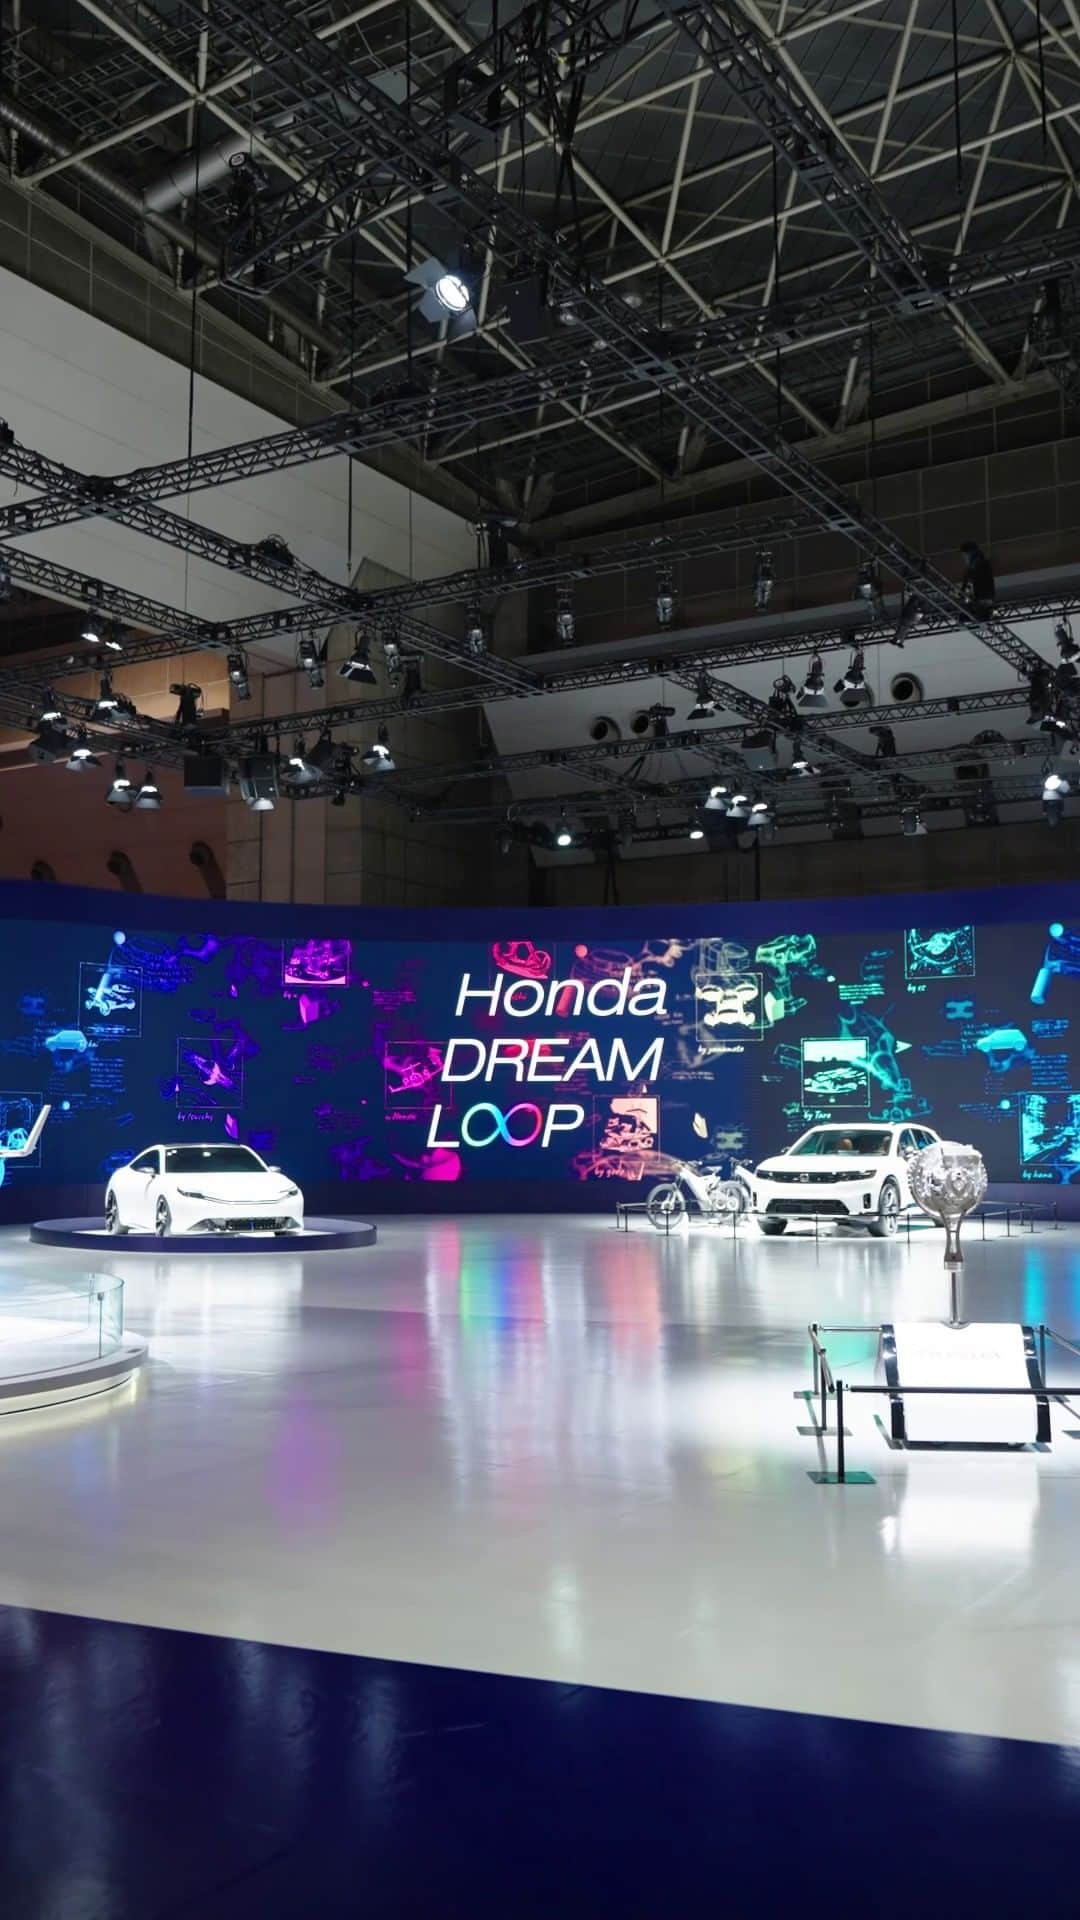 Honda 本田技研工業(株)のインスタグラム：「Thank you for joining us! #JMS2023  We hope you were excited as we were to see Honda’s vision of the future at #JapanMobilityShow 2023!  Honda will continue to bring you exciting products, and help you realize your dreams. #ThePowerOfDreams  #JMS2023 への来場ありがとうございました！  今回 #ジャパンモビリティショー でHondaが描いた未来の世界を見て、少しでもワクワクしてくださったら幸いです。  これからもHondaは皆さんをワクワクさせ、夢の力で夢の実現を後押しする企業であり続けます。 #HowWeMoveYou」